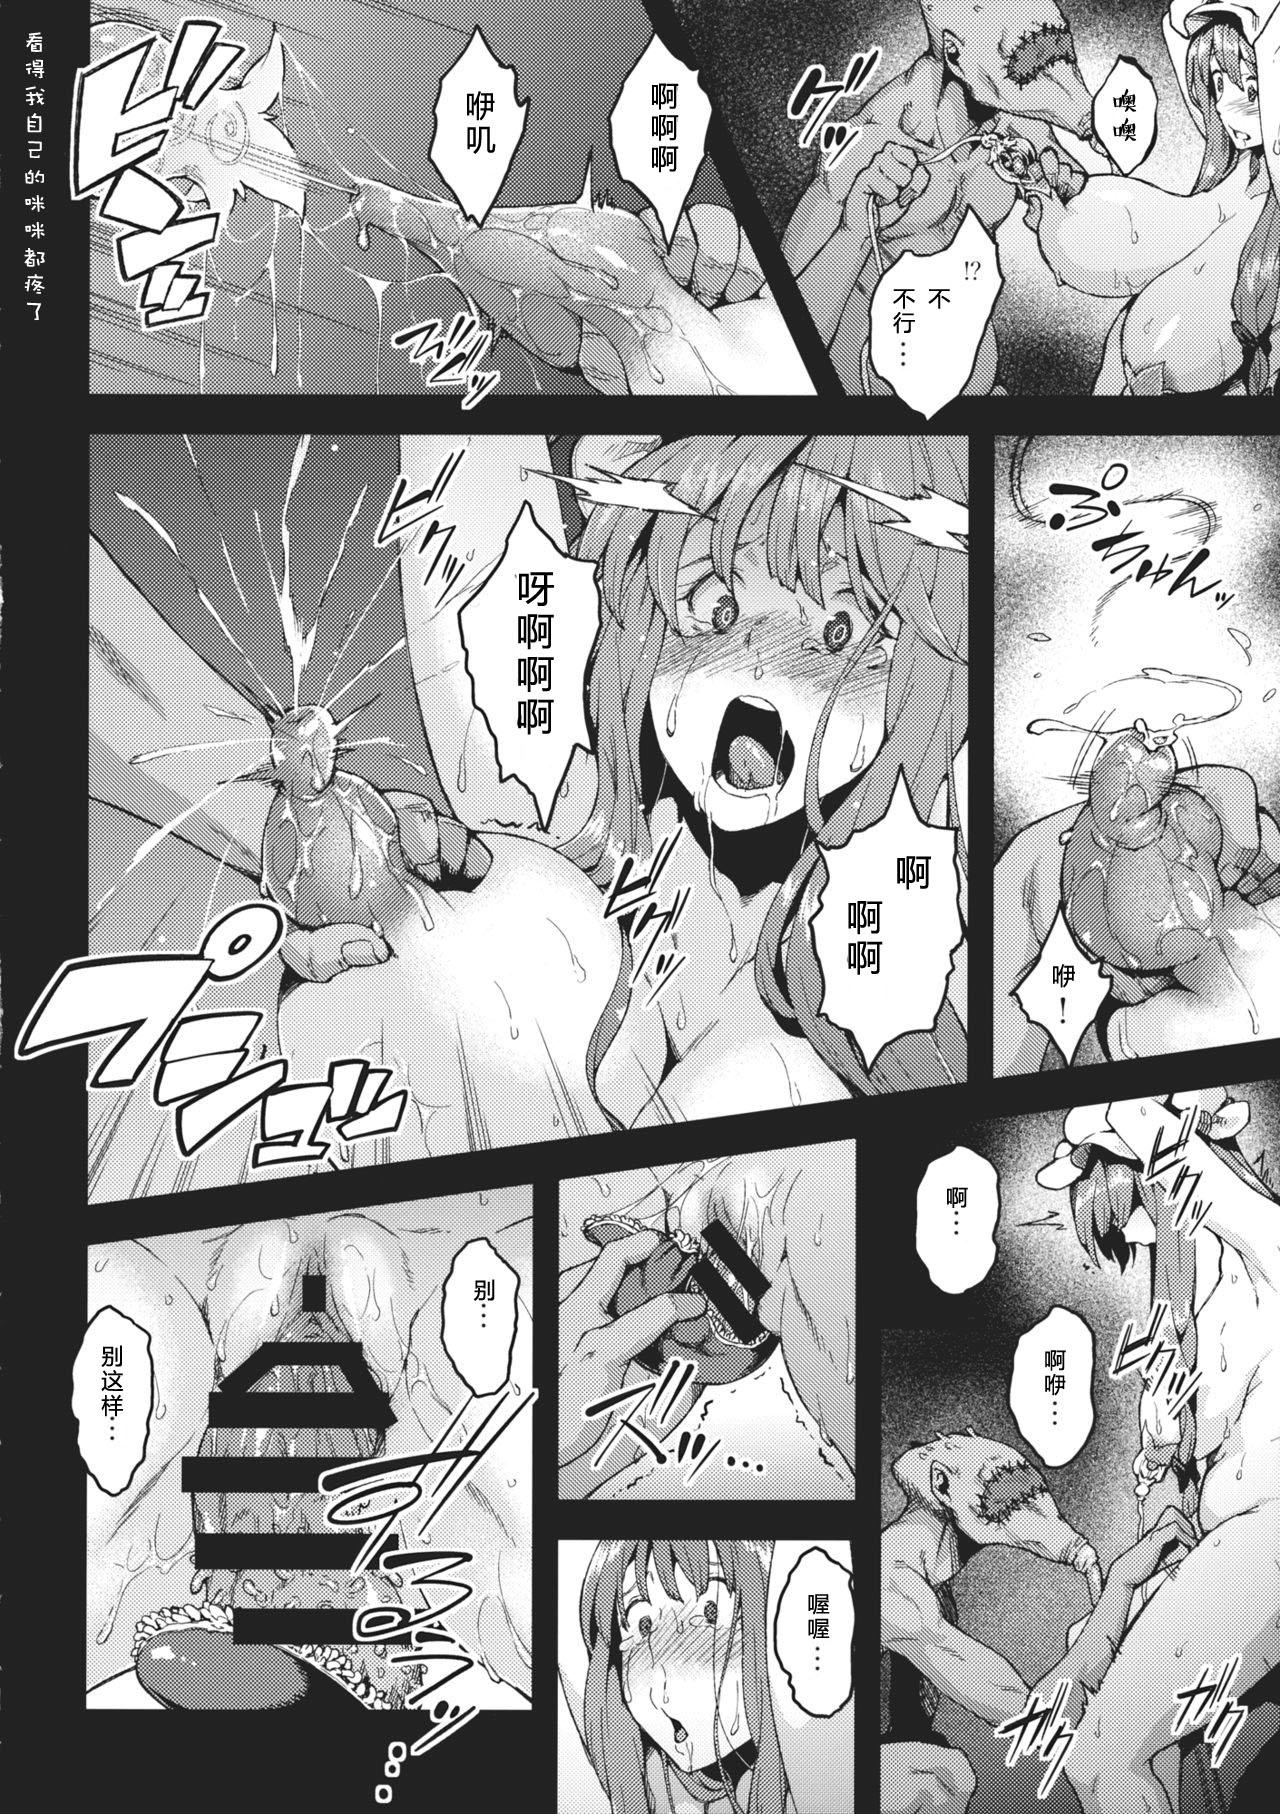 Young Tits Pache Otoshi after II - Touhou project Ex Girlfriends - Page 7